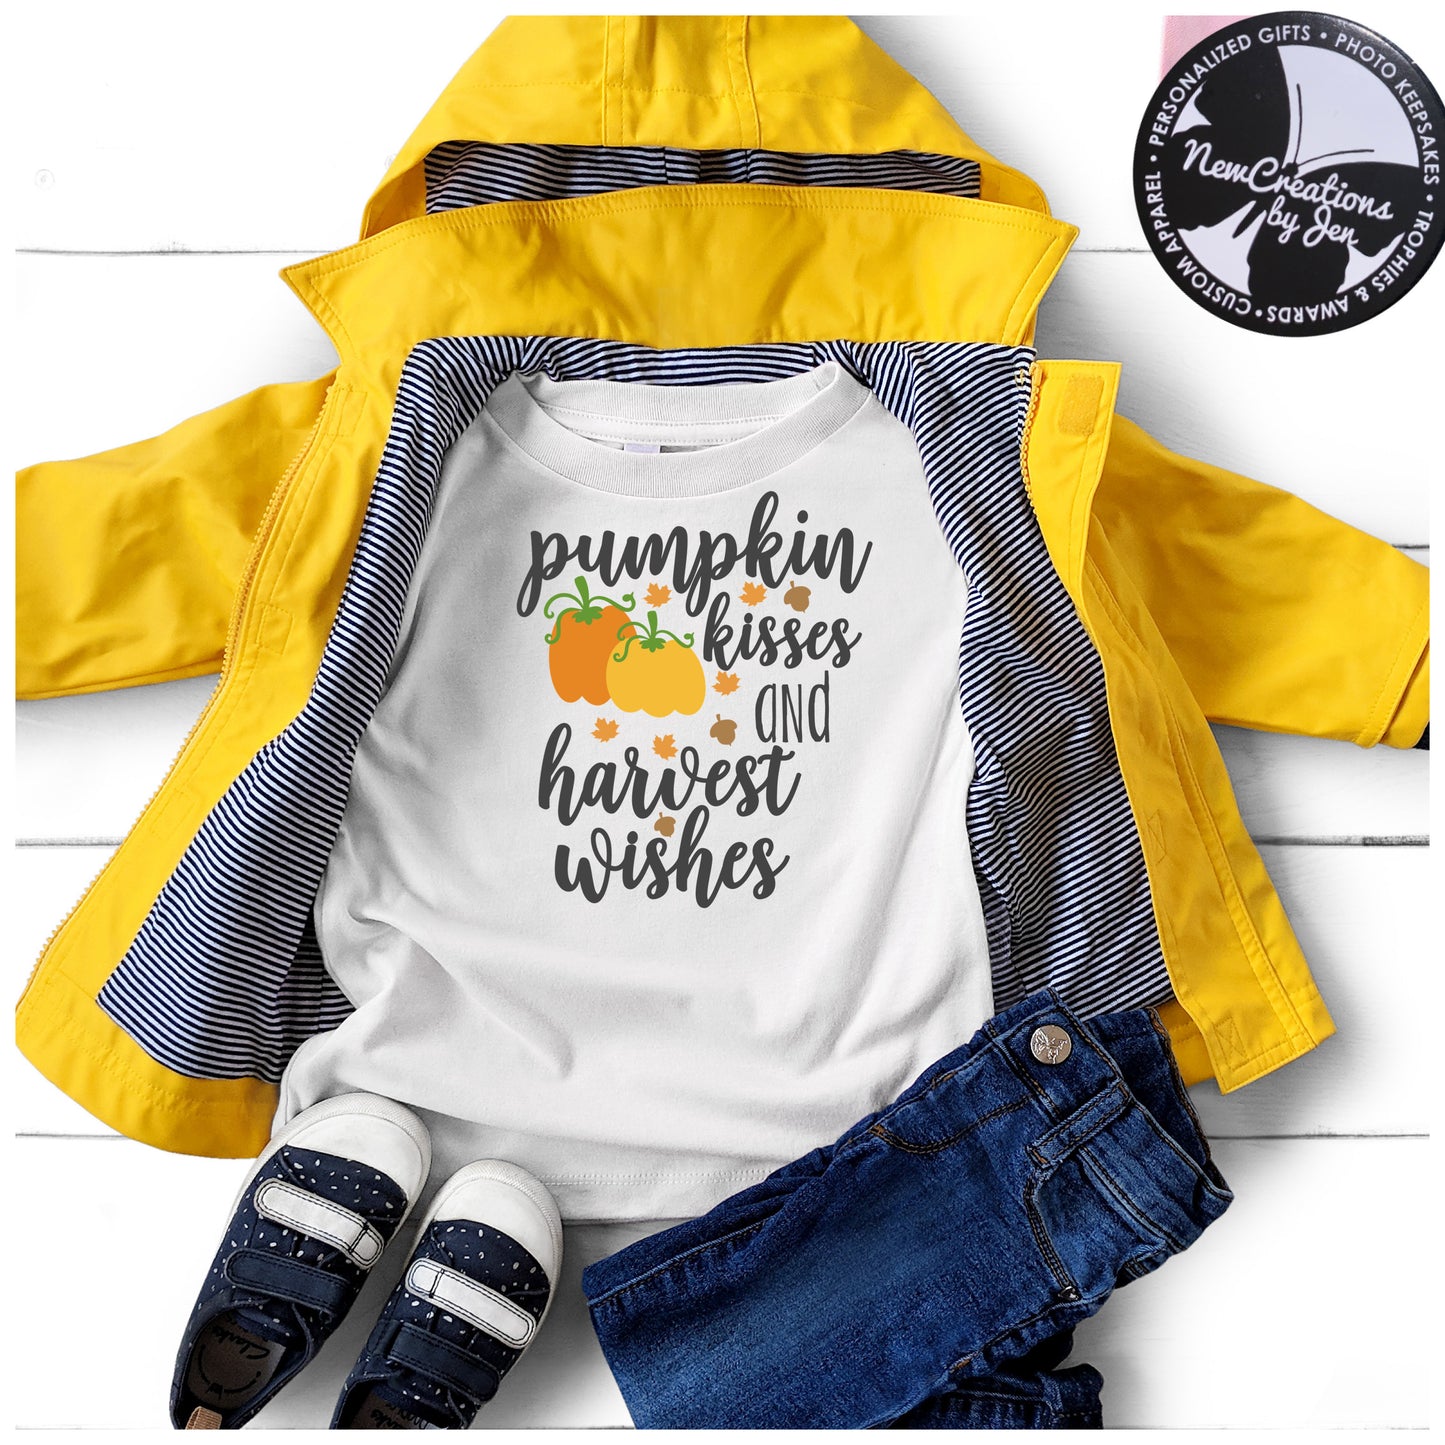 pumpkin kisses and harvest wishes shirt with a yellow raincoat